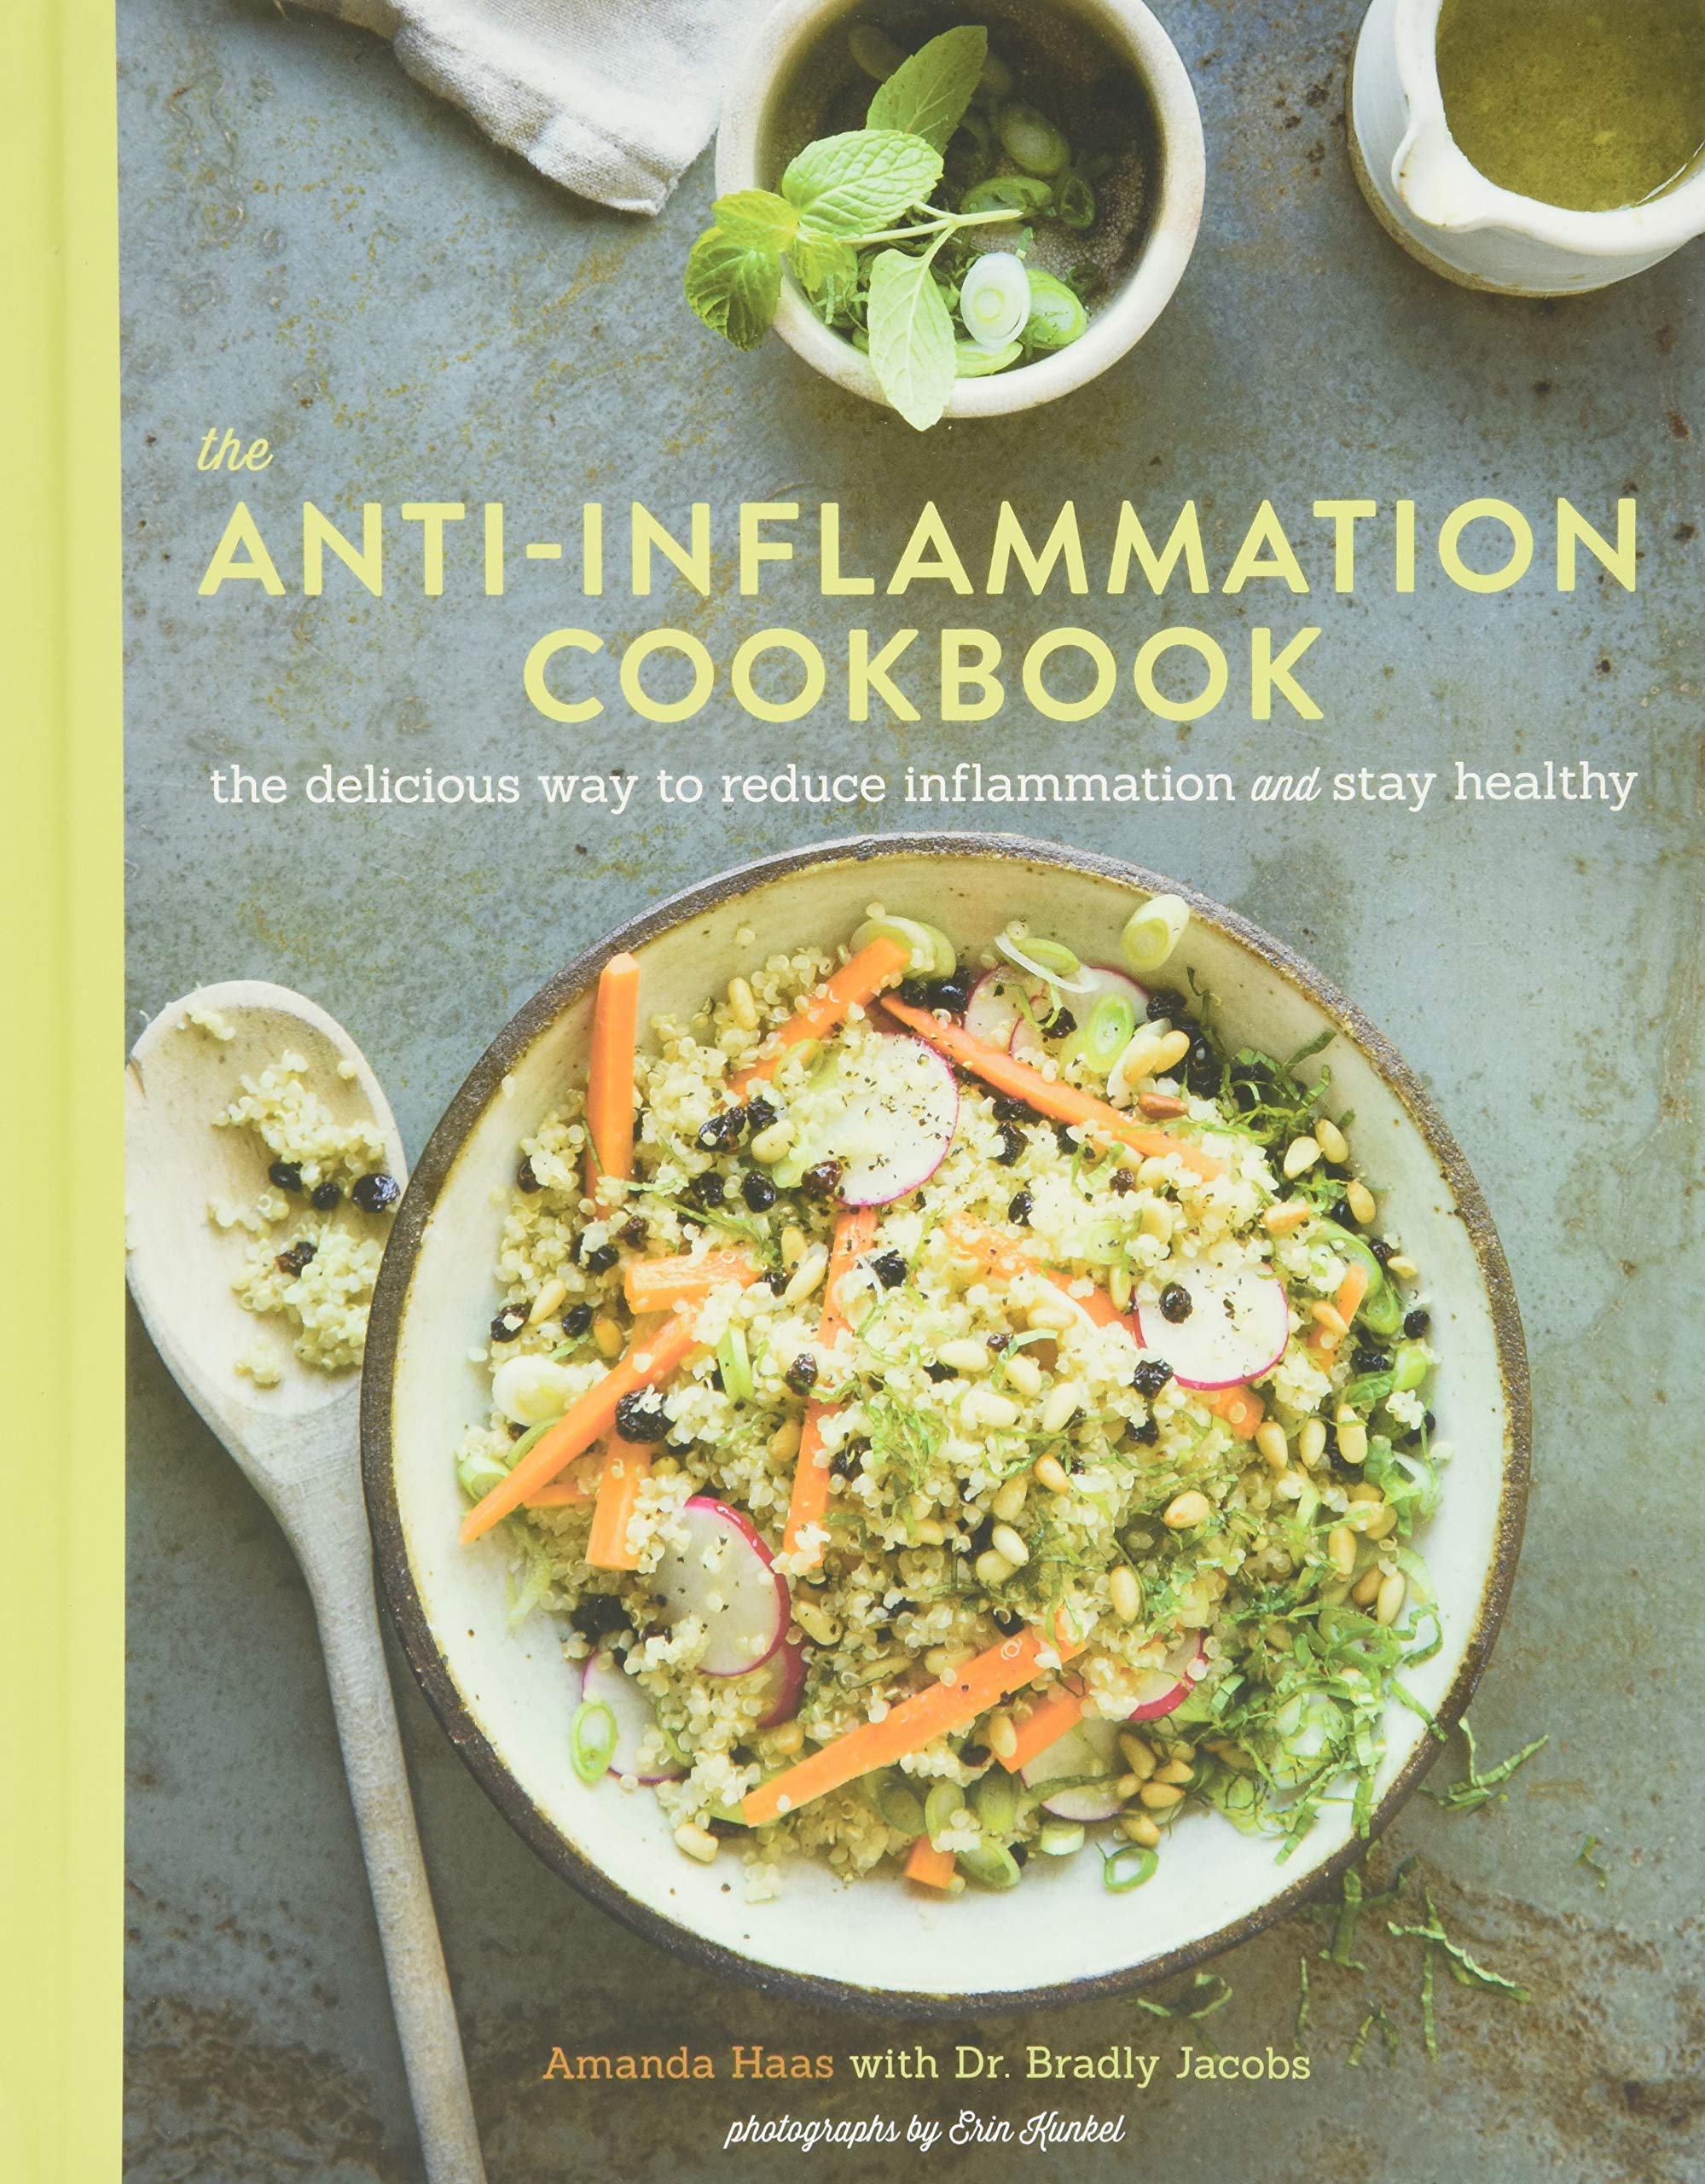 The Anti-Inflammation Cookbook: The Delicious Way to Reduce Inflammation and Stay Healthy (Amanda Haas, Dr. Bradly Jacobs) *Signed*